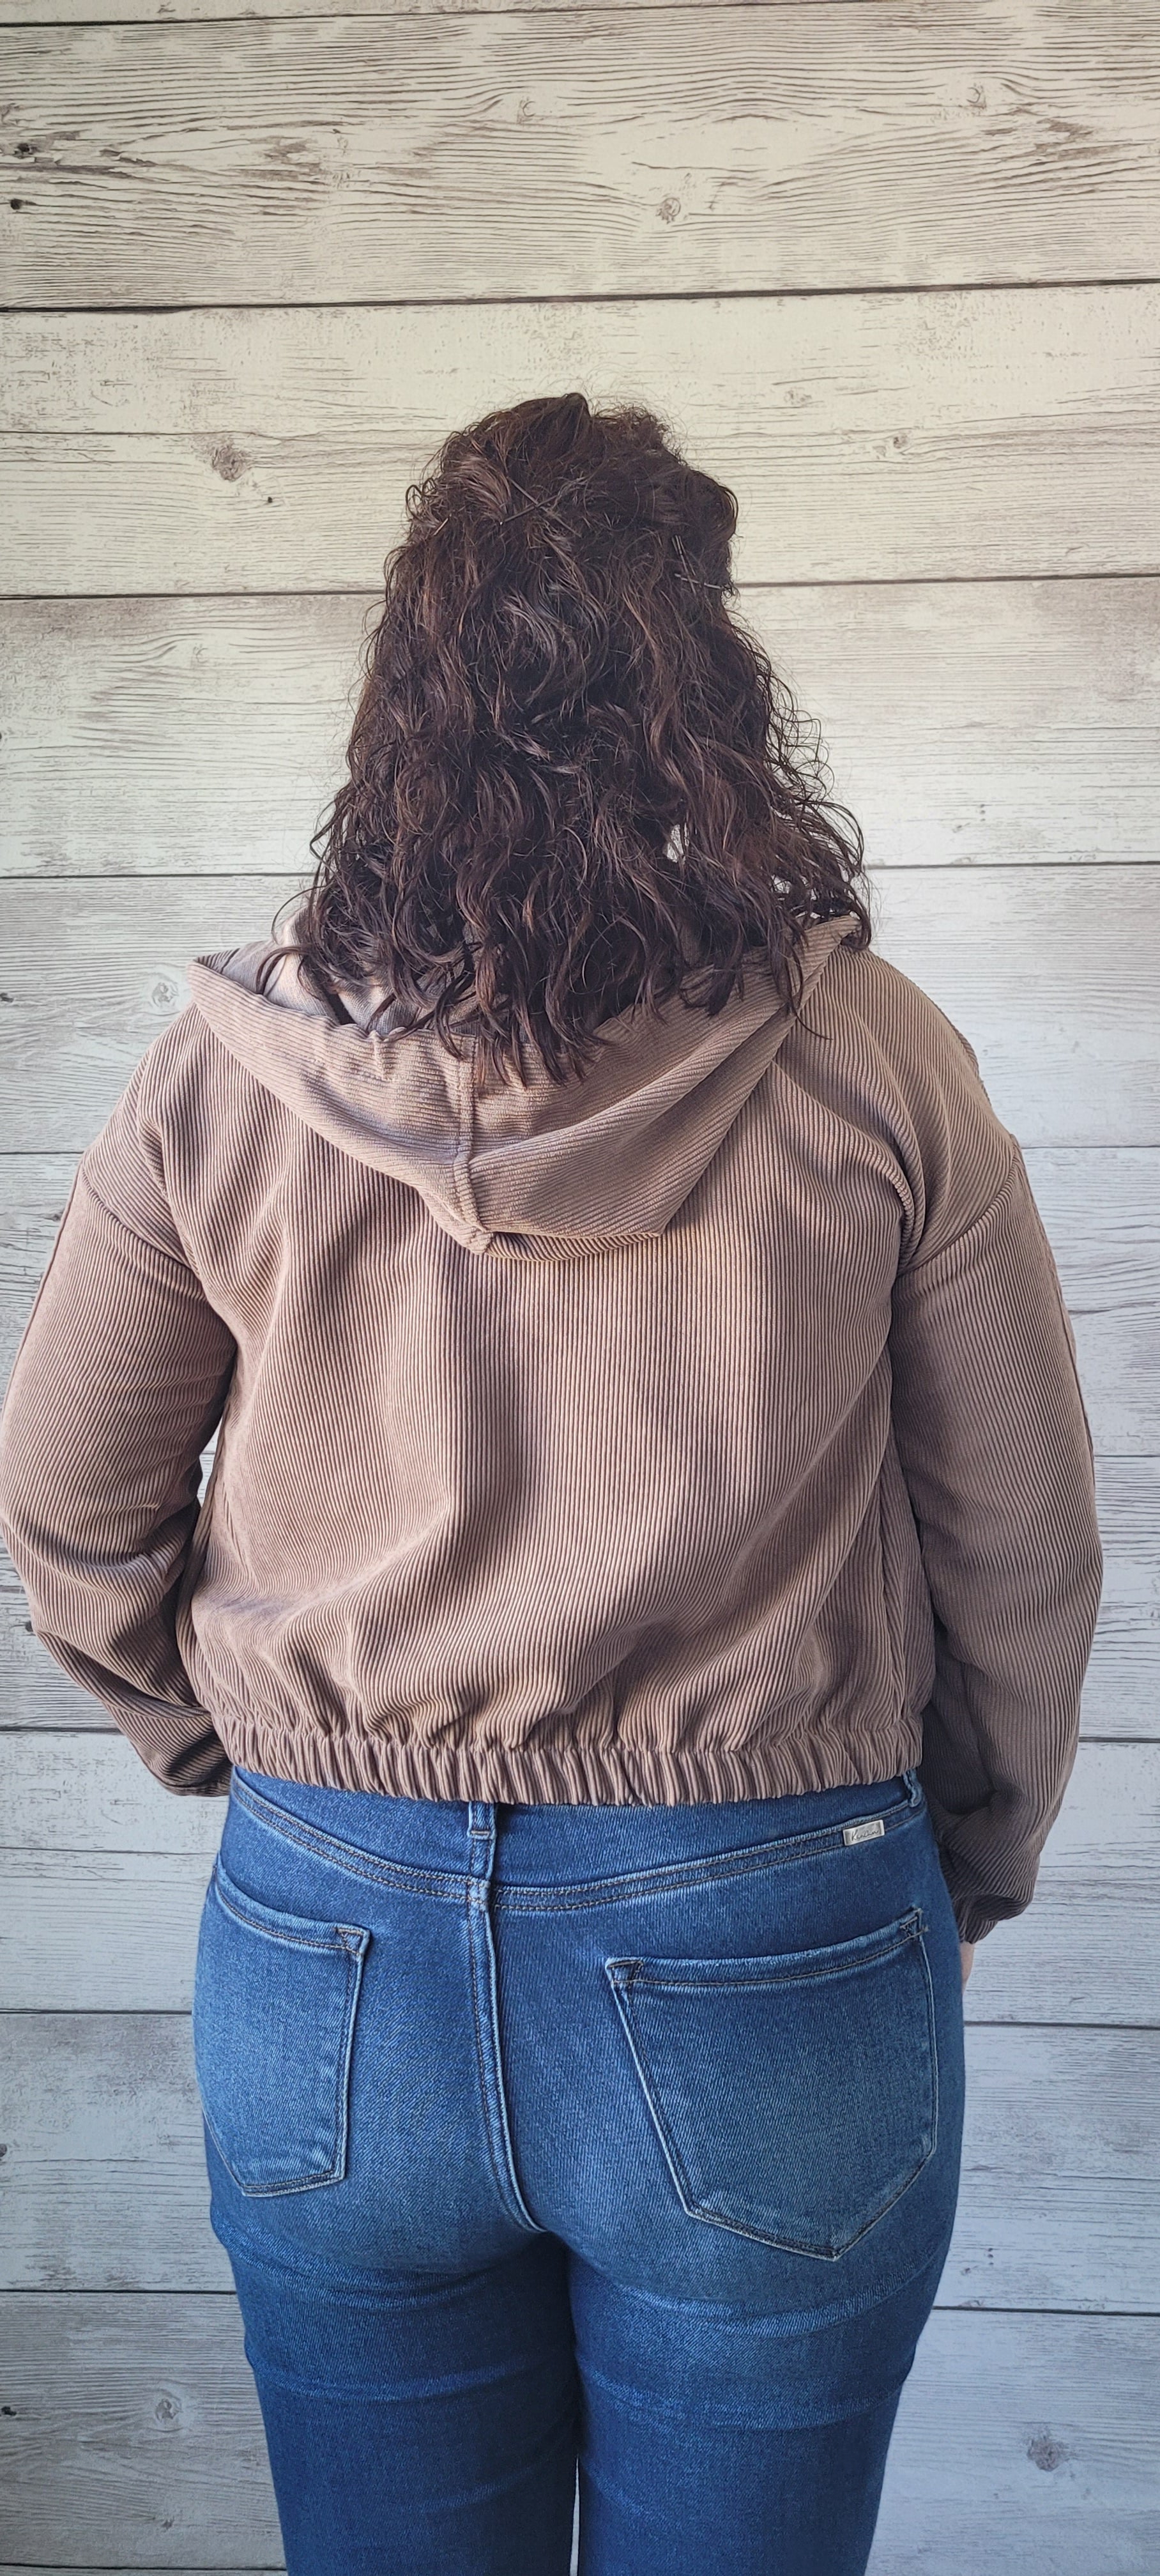 Be cozy and cool with our "Debra Mocha Corduroy Jacket"! With a zipper front, elastic sleeves and waist, plus a hood, you'll be sure to stay warm. Side pockets will keep your hands toasty, and the front tie will keep you looking oh-so-stylish. Cute and comfy?! What more can ya ask for? Sizes small through large.